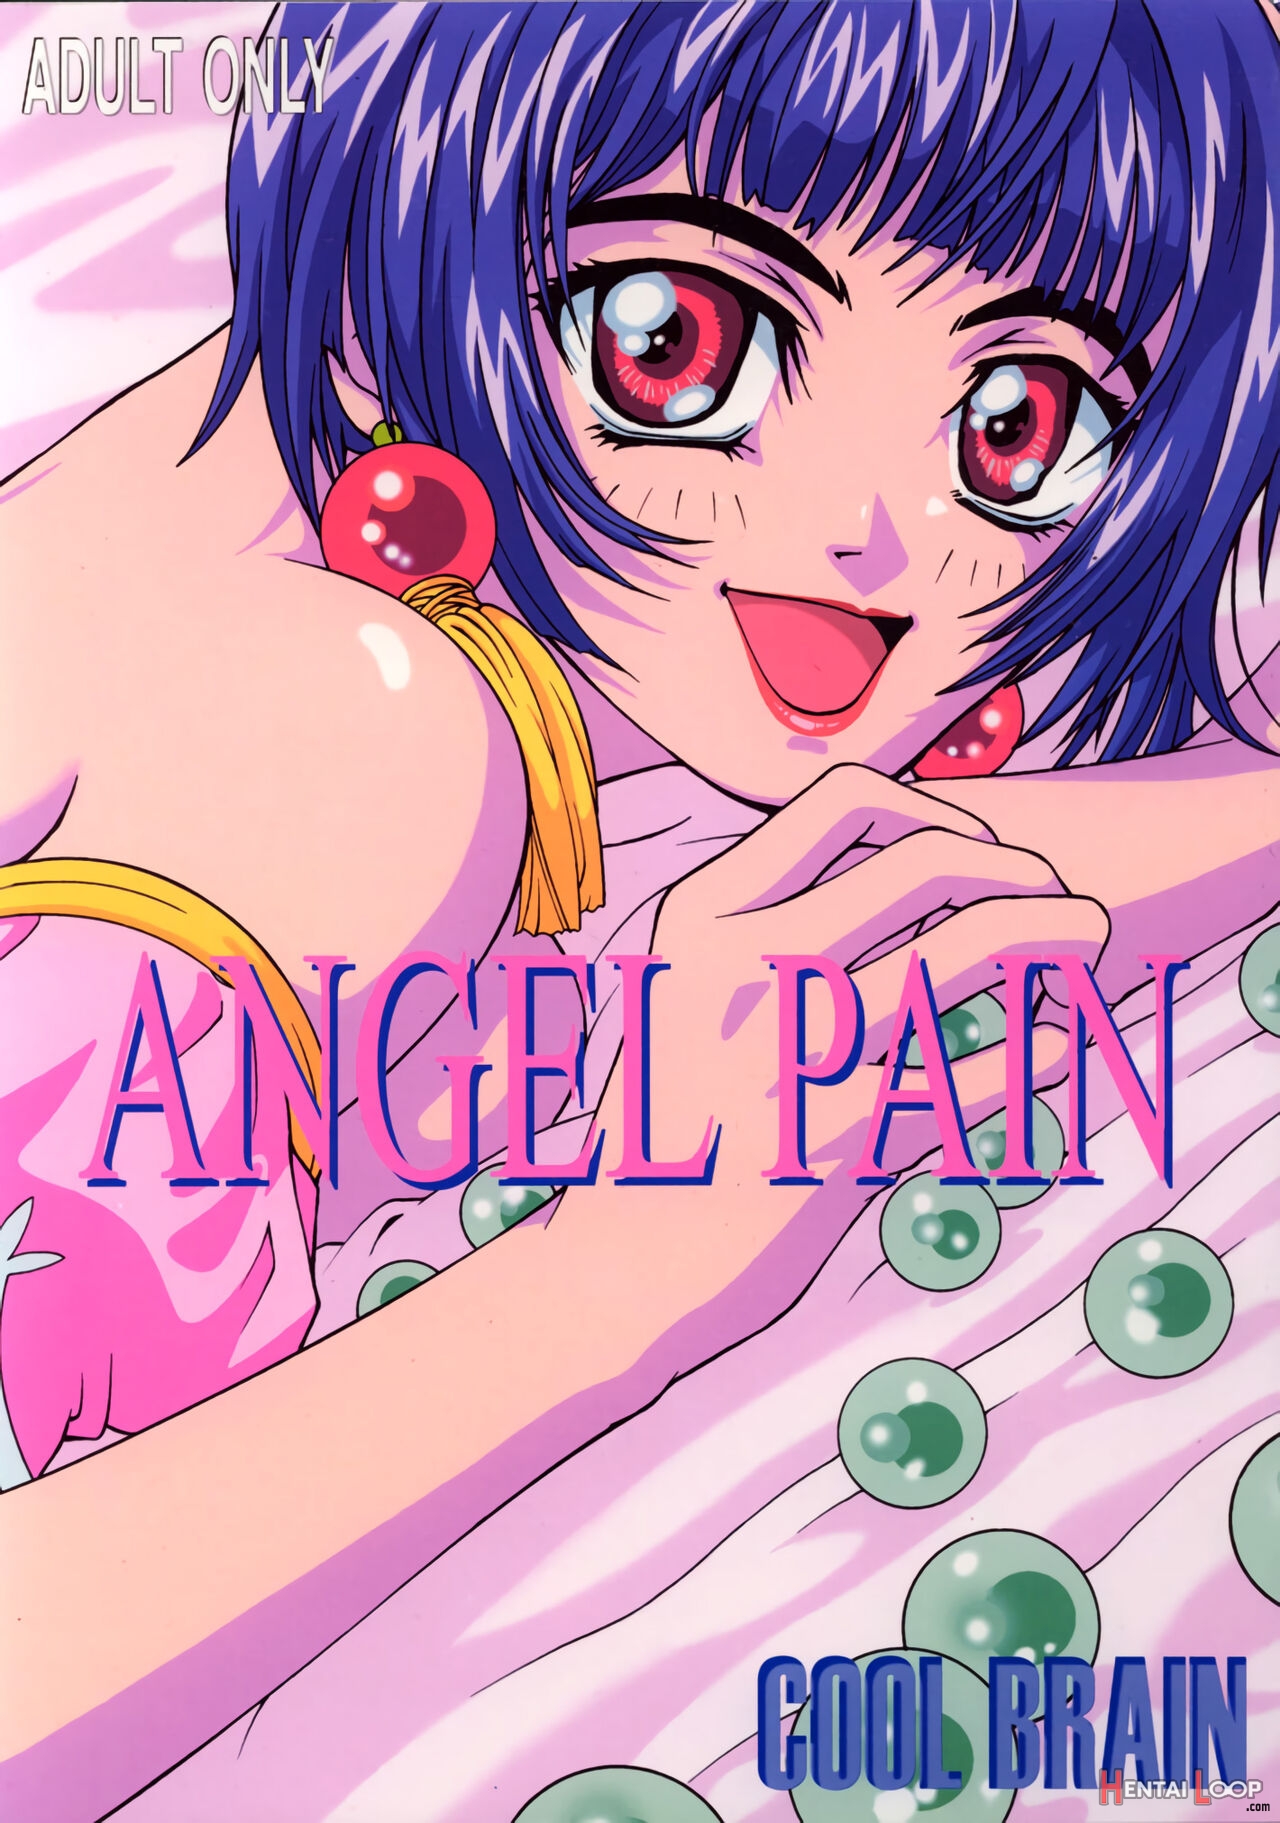 Angel Pain page 1